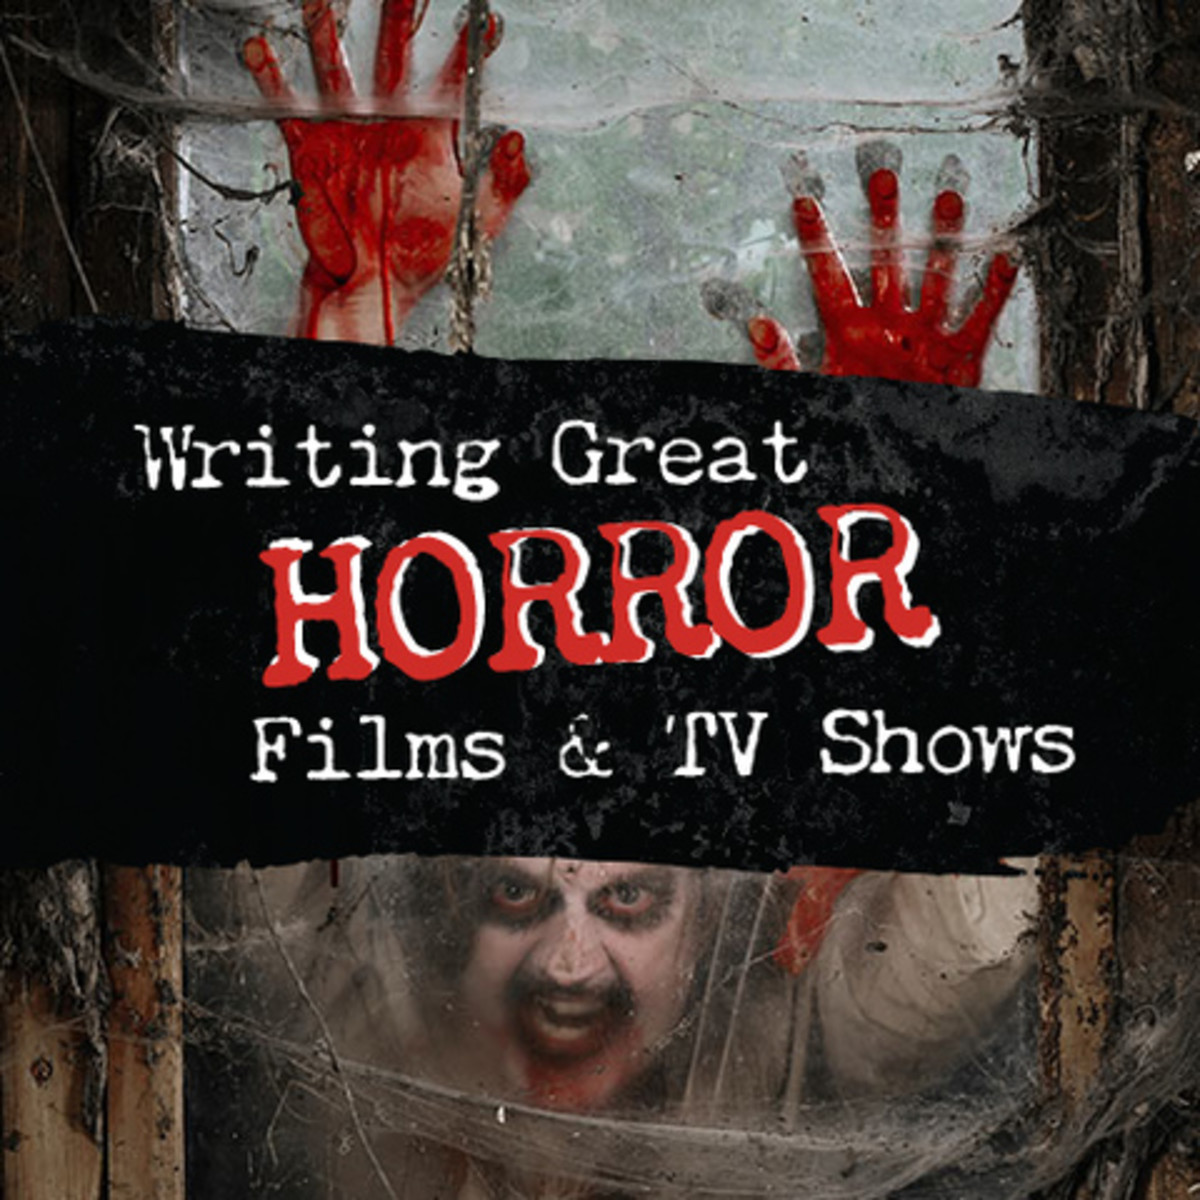 Screenwriter Glenn M. Benest, who worked alongside legendary horror writer Wes Craven, offers tips on writing horror films and TV shows.